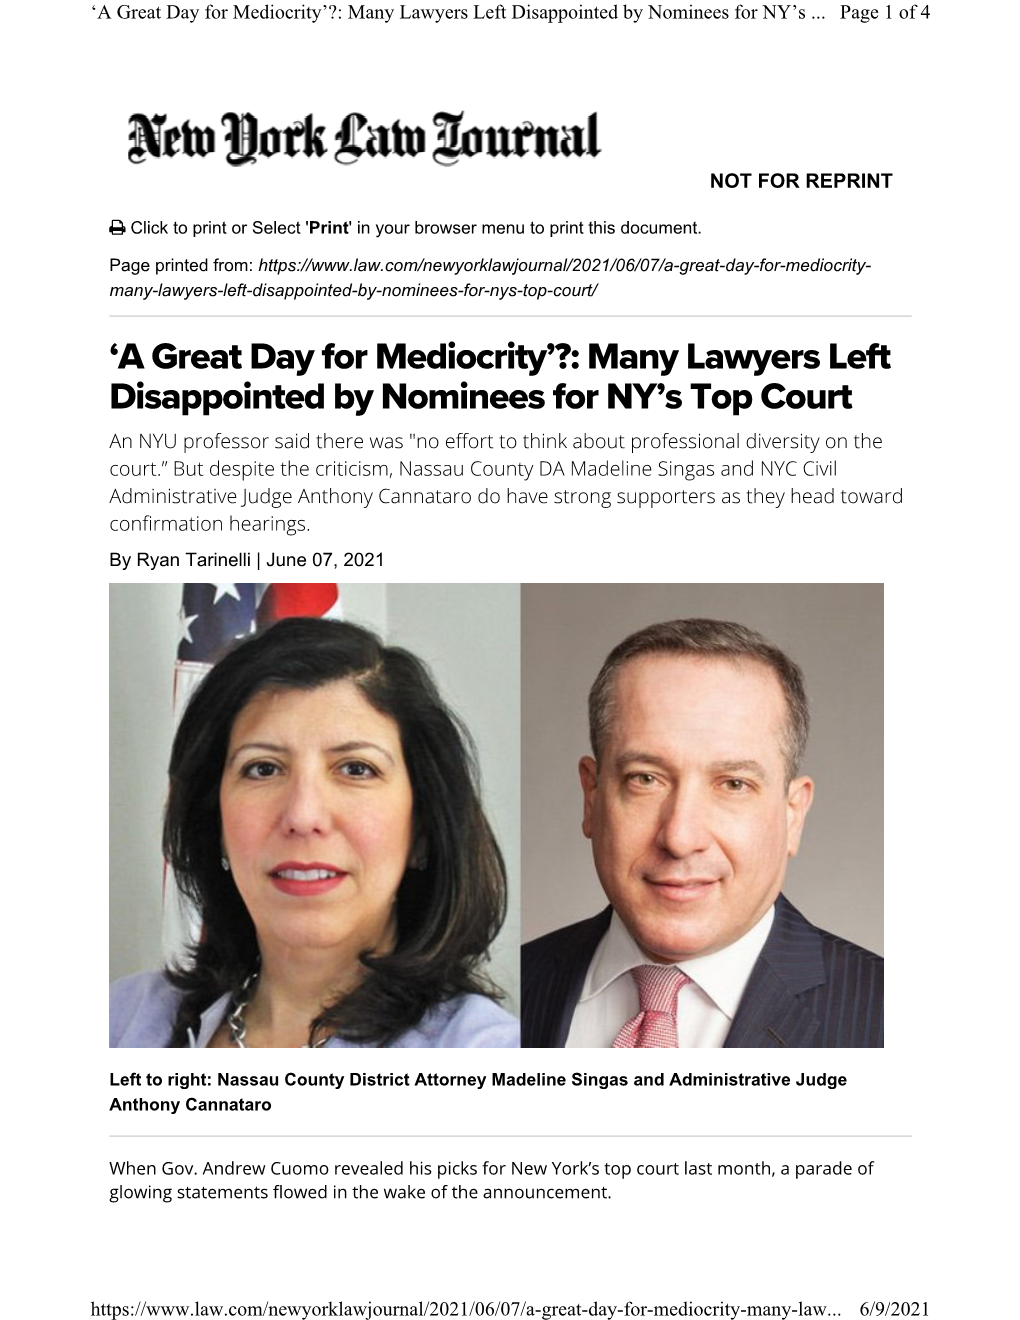 'A Great Day for Mediocrity'?: Many Lawyers Left Disappointed By